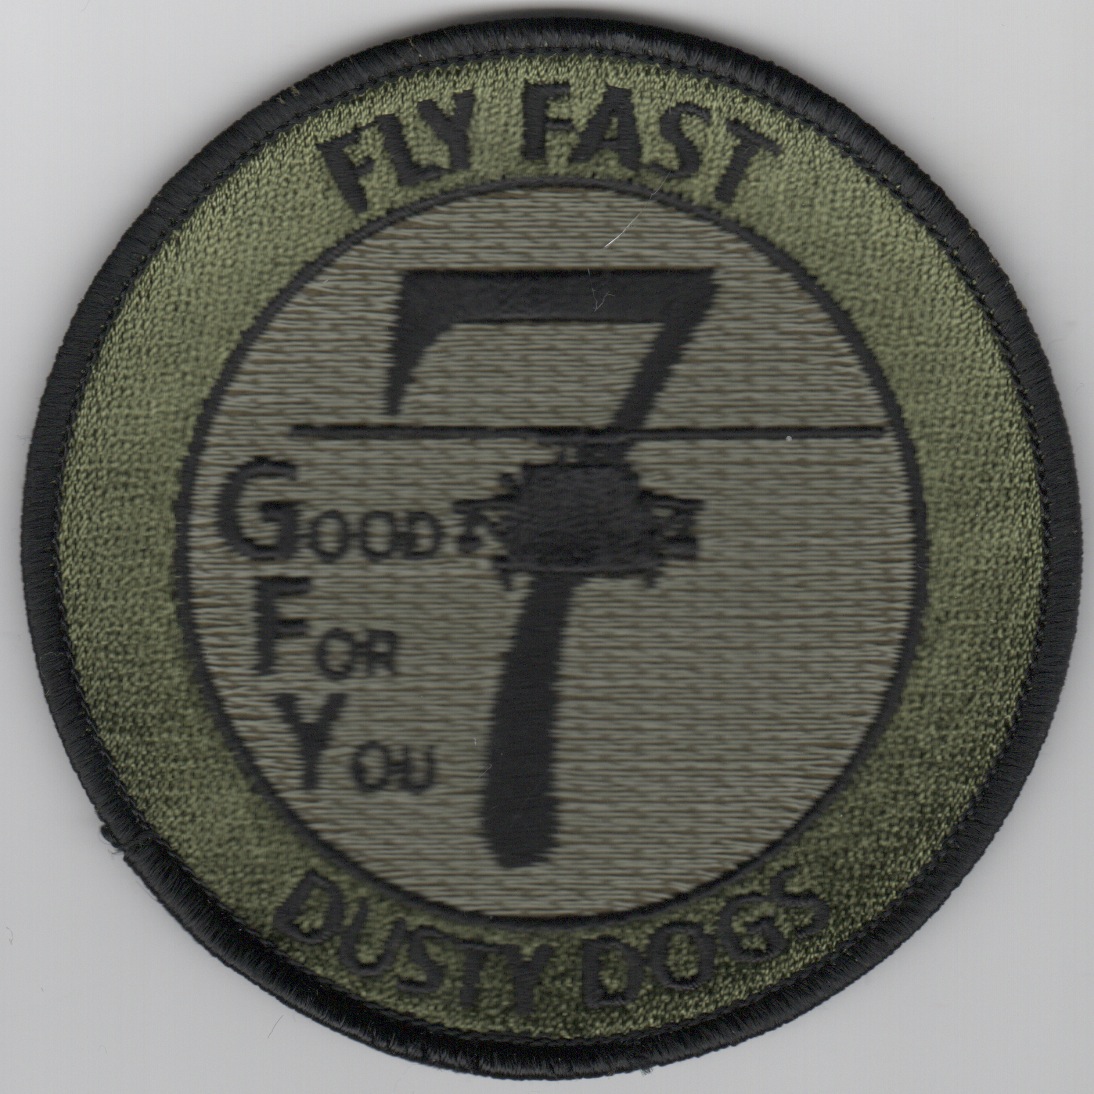 HSC-7 'Fly Fast' (Subd)